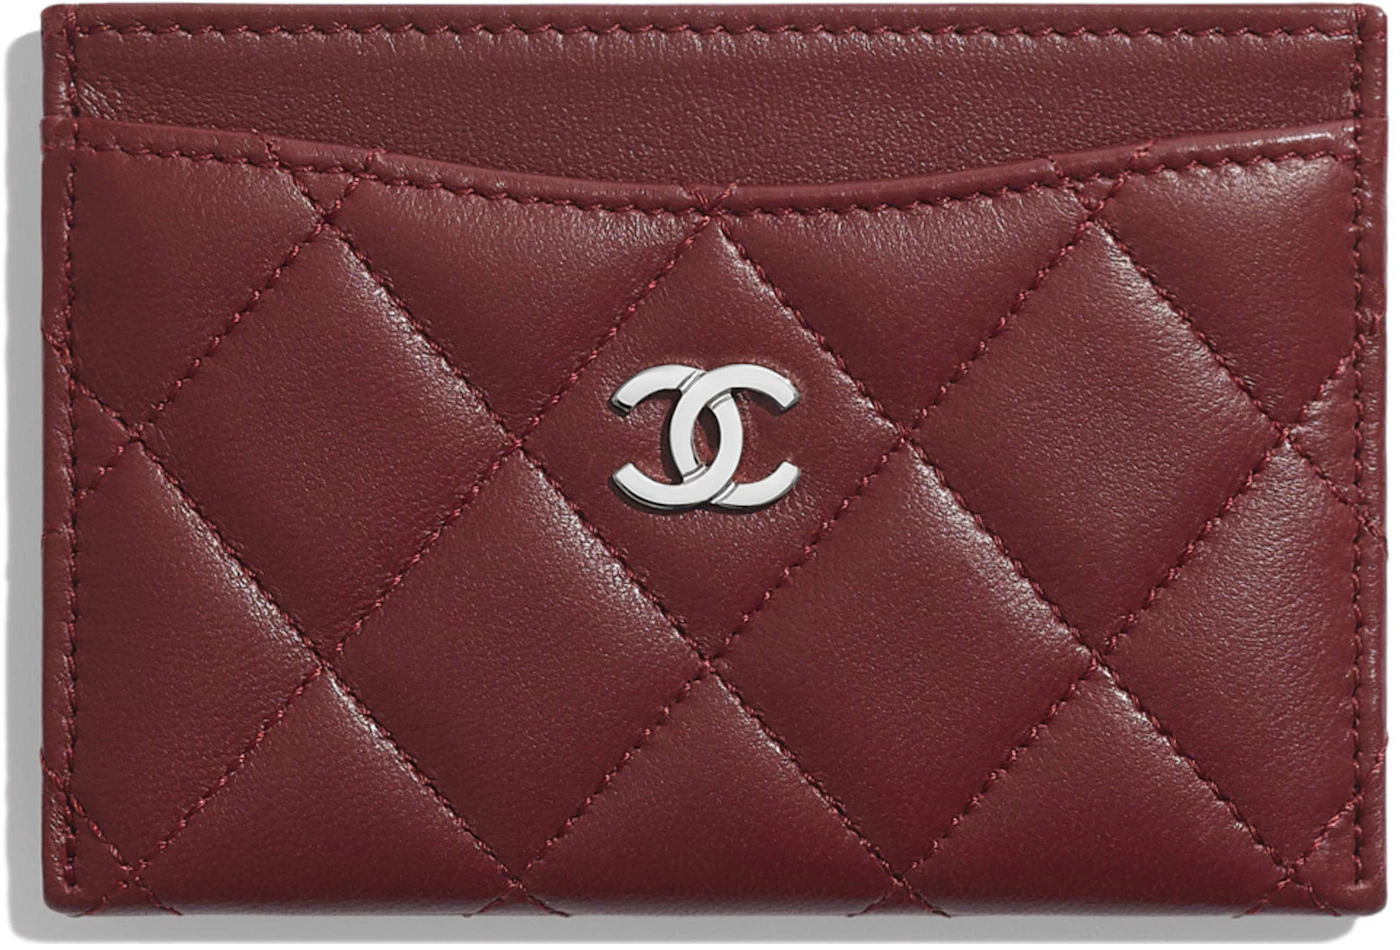 Authentic Chanel Quilted Red Calfskin Leather Reissue Flap Card